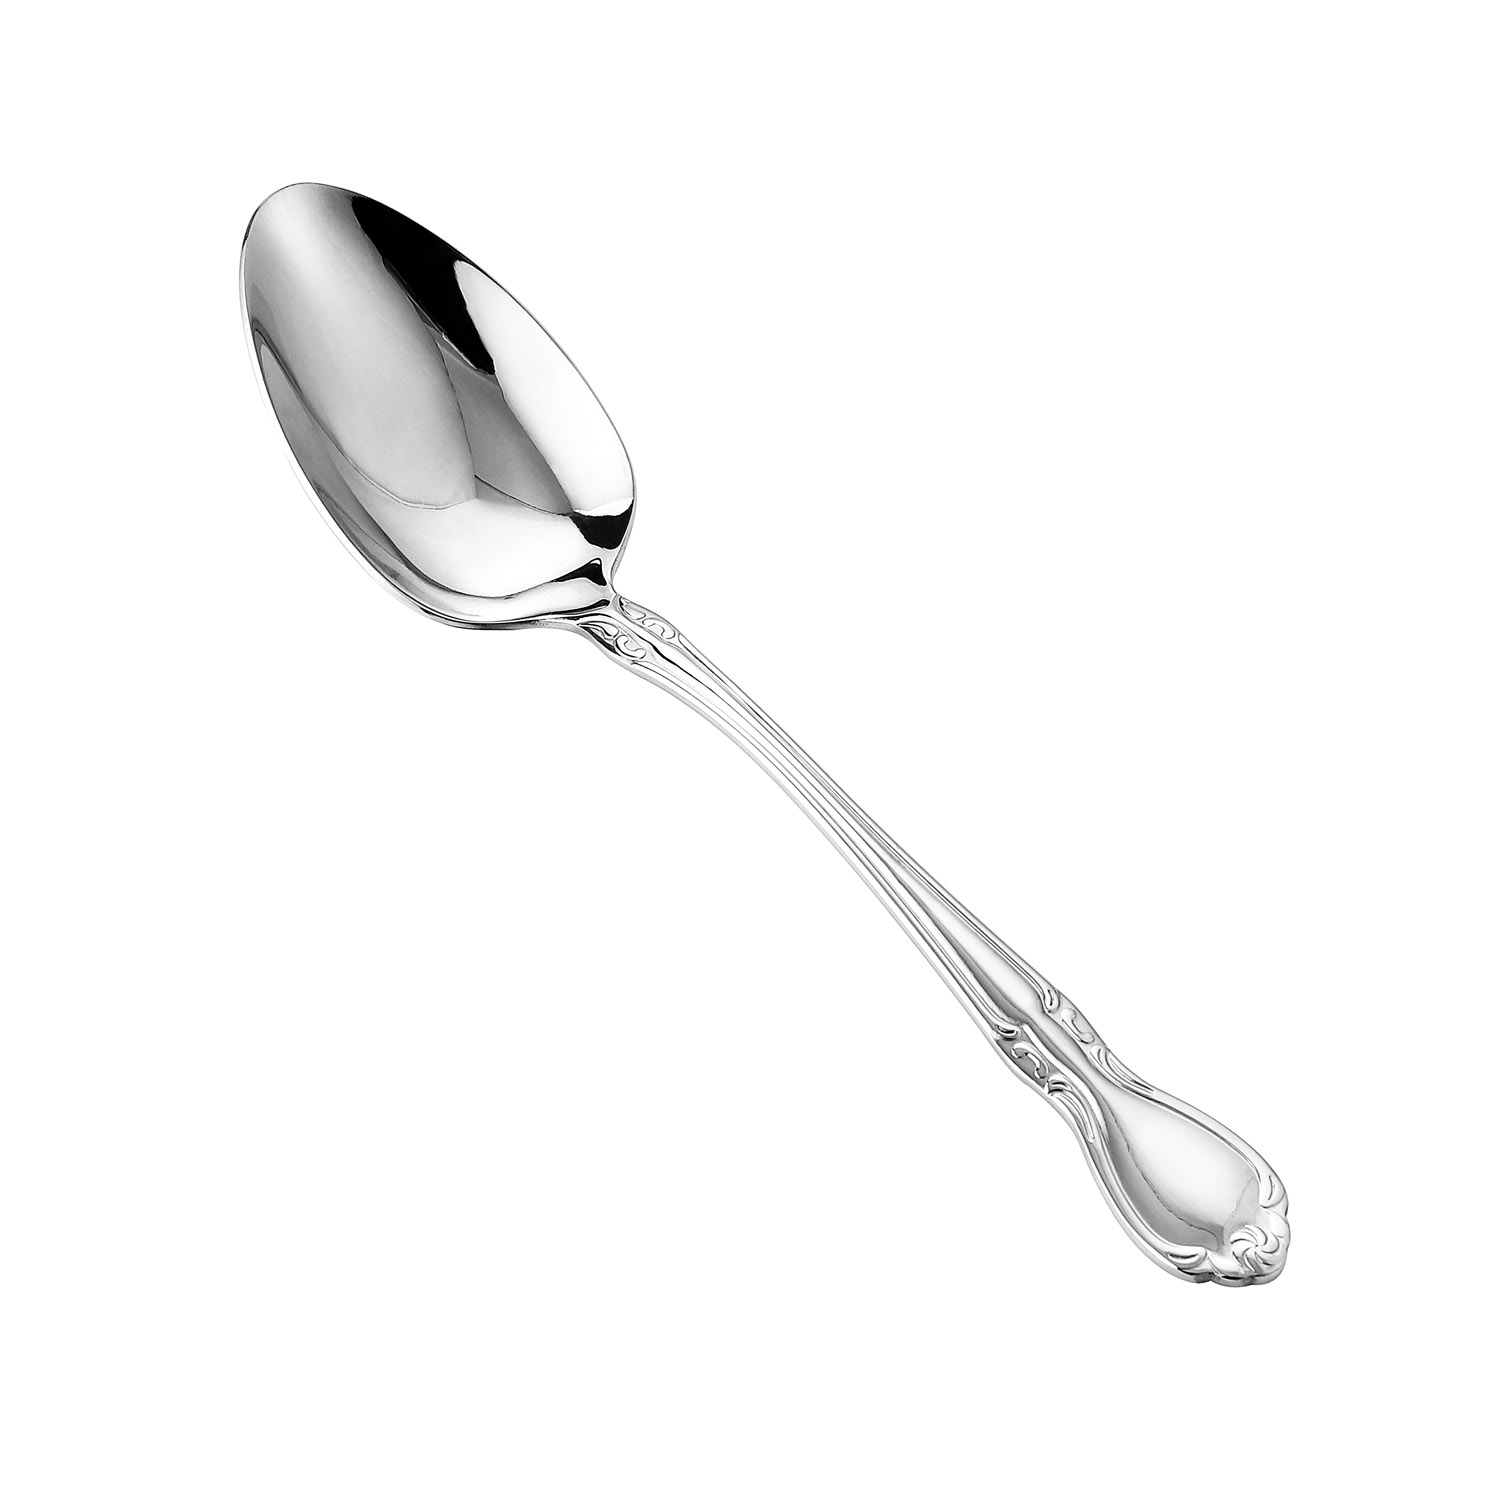 CAC China 8023-03 Glamour Dinner Spoon, Extra Heavy Weight 18/8, 7 1/4" - 1 dozen